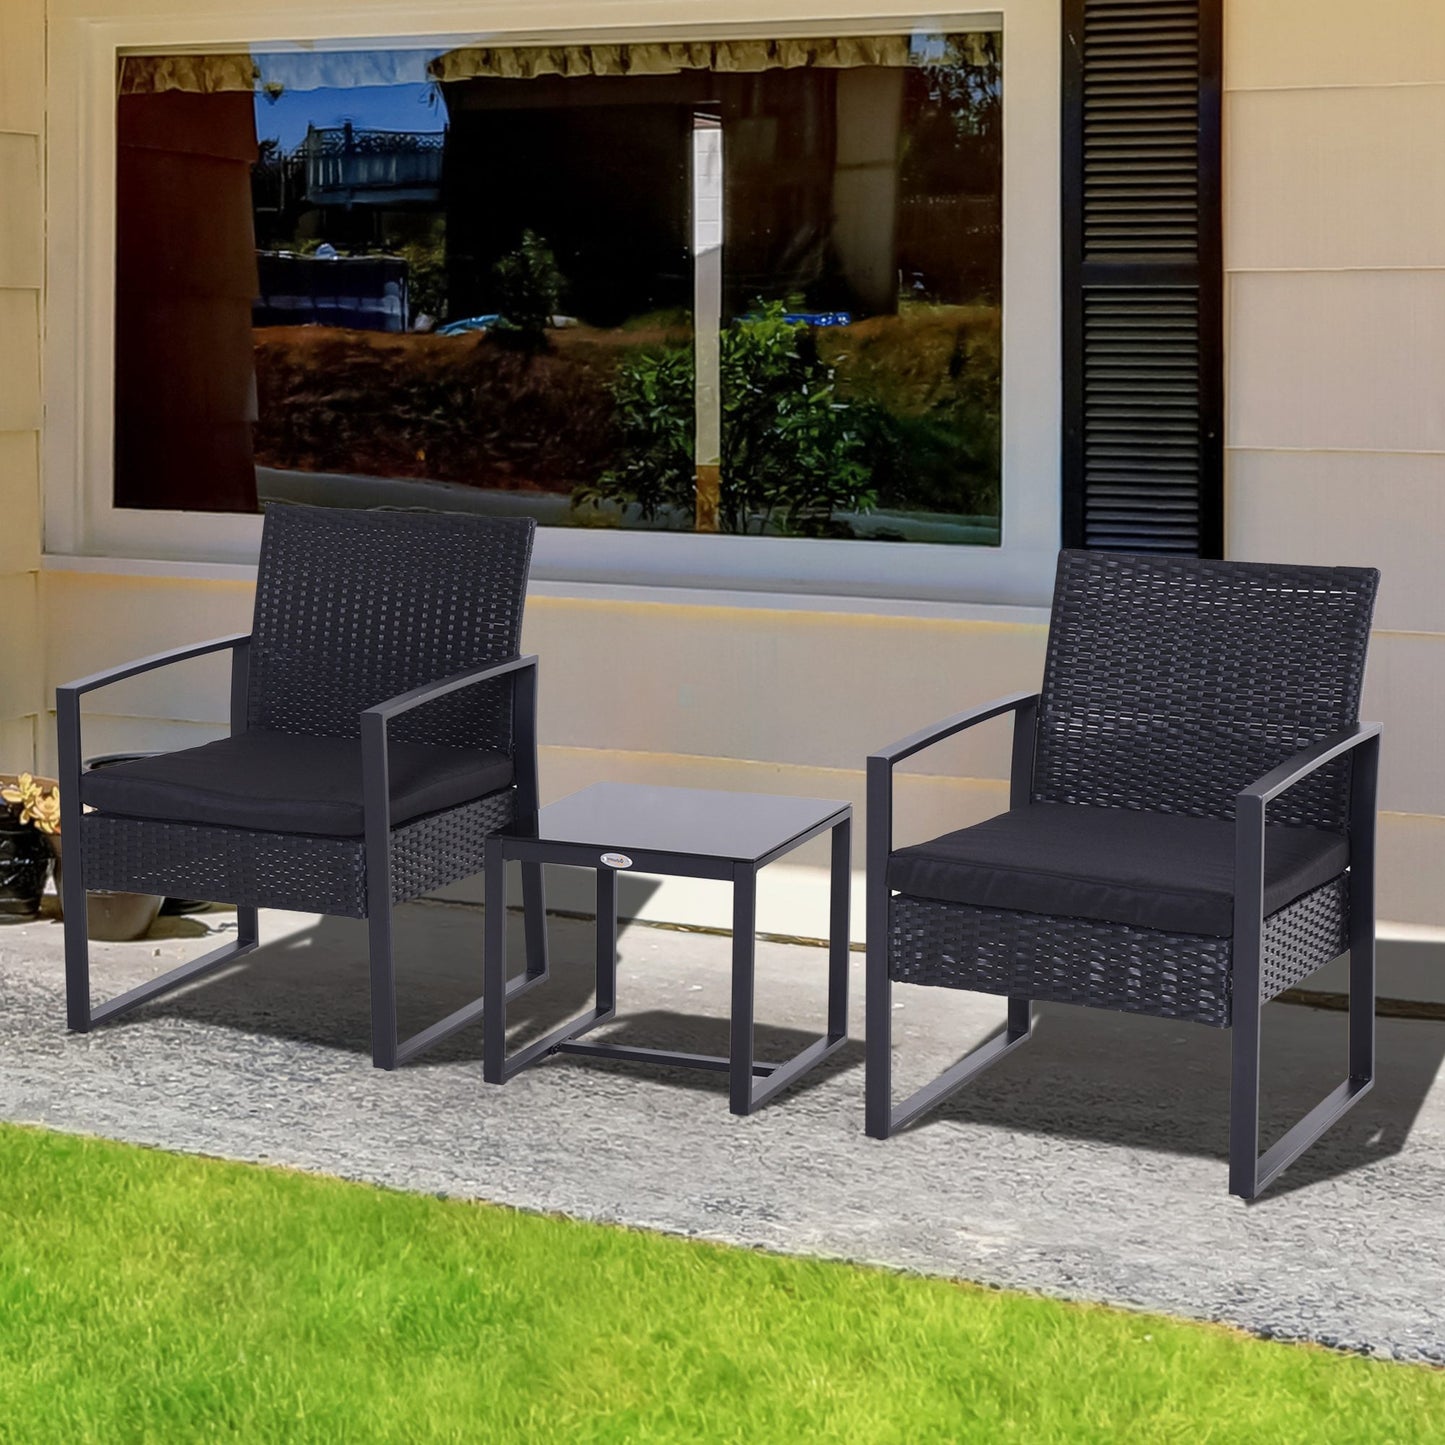 Outsunny Rattan Patio Lounge Set: 2 Seater Wicker Sofa, Coffee Table & Chairs, Conservatory Furniture, Black